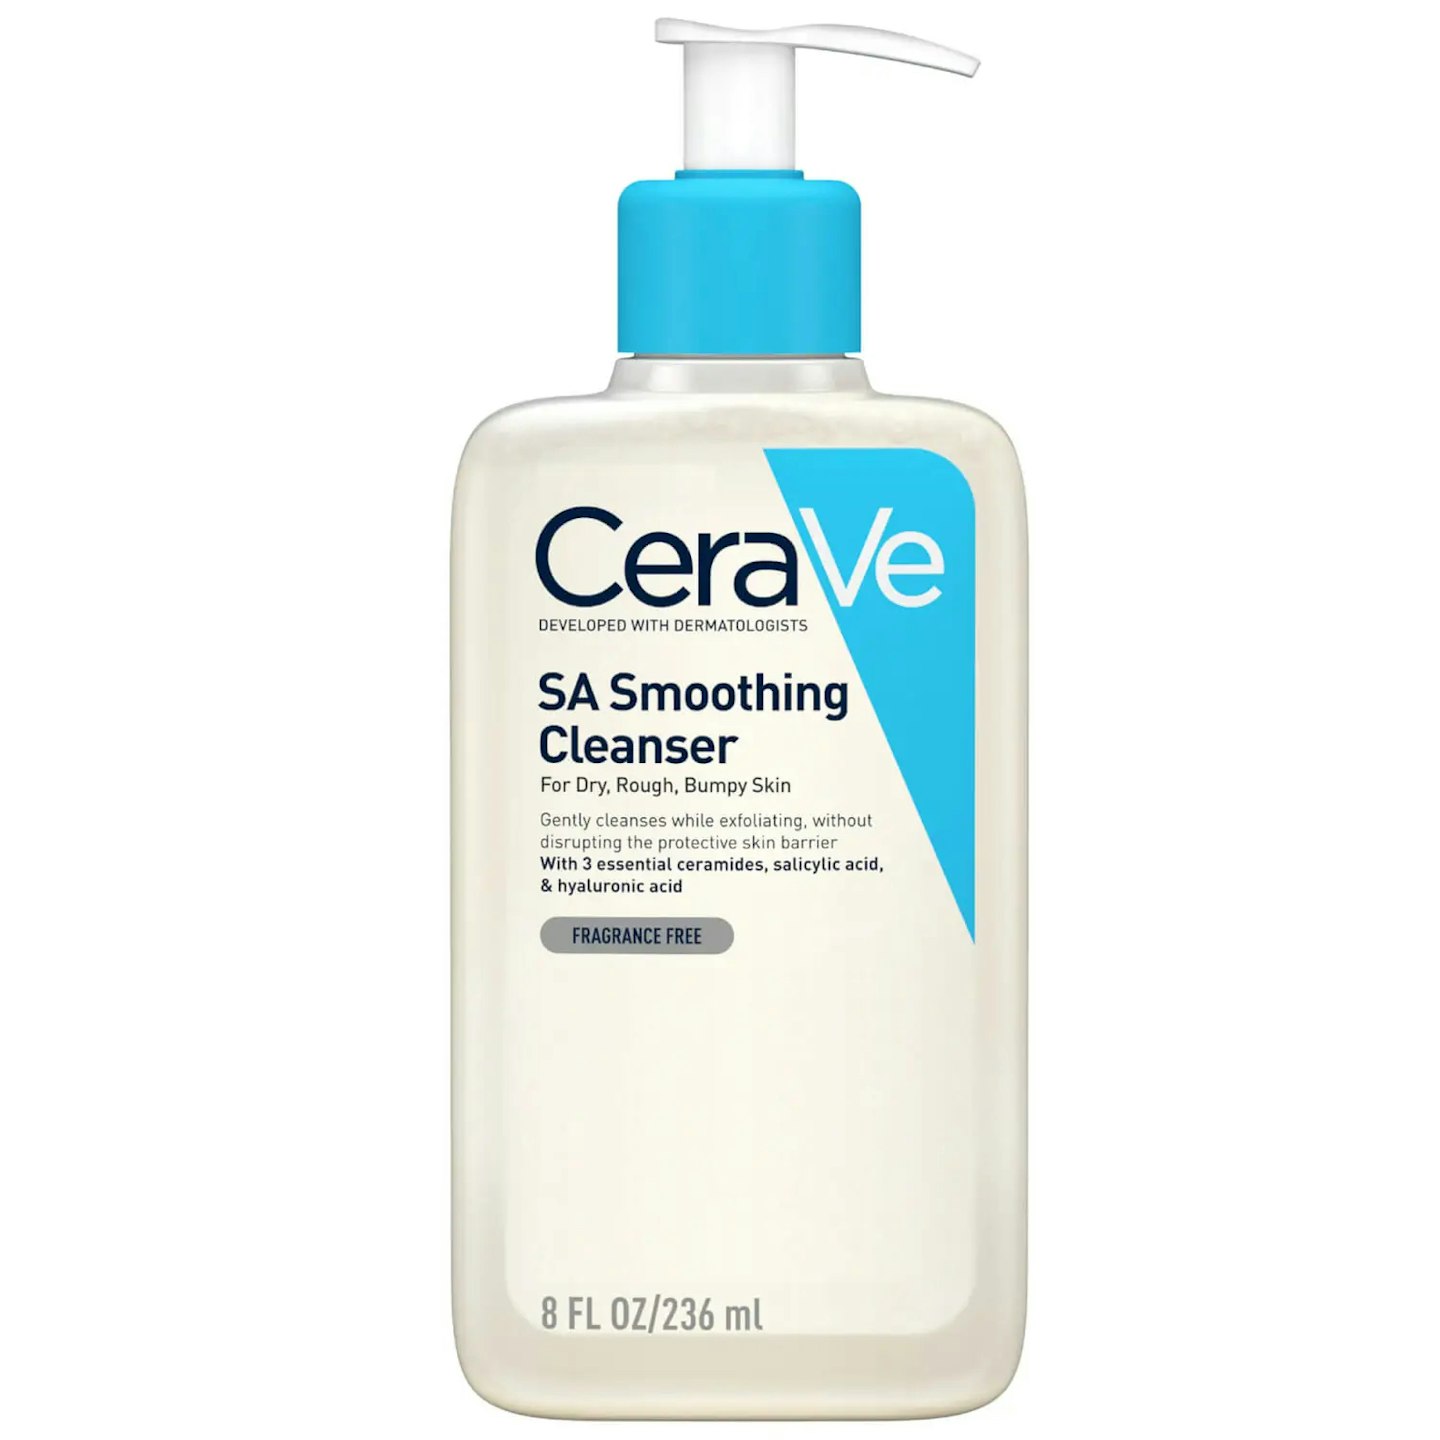 CeraVe SA Smoothing Cleanser for Dry, Rough & Bumpy Skin